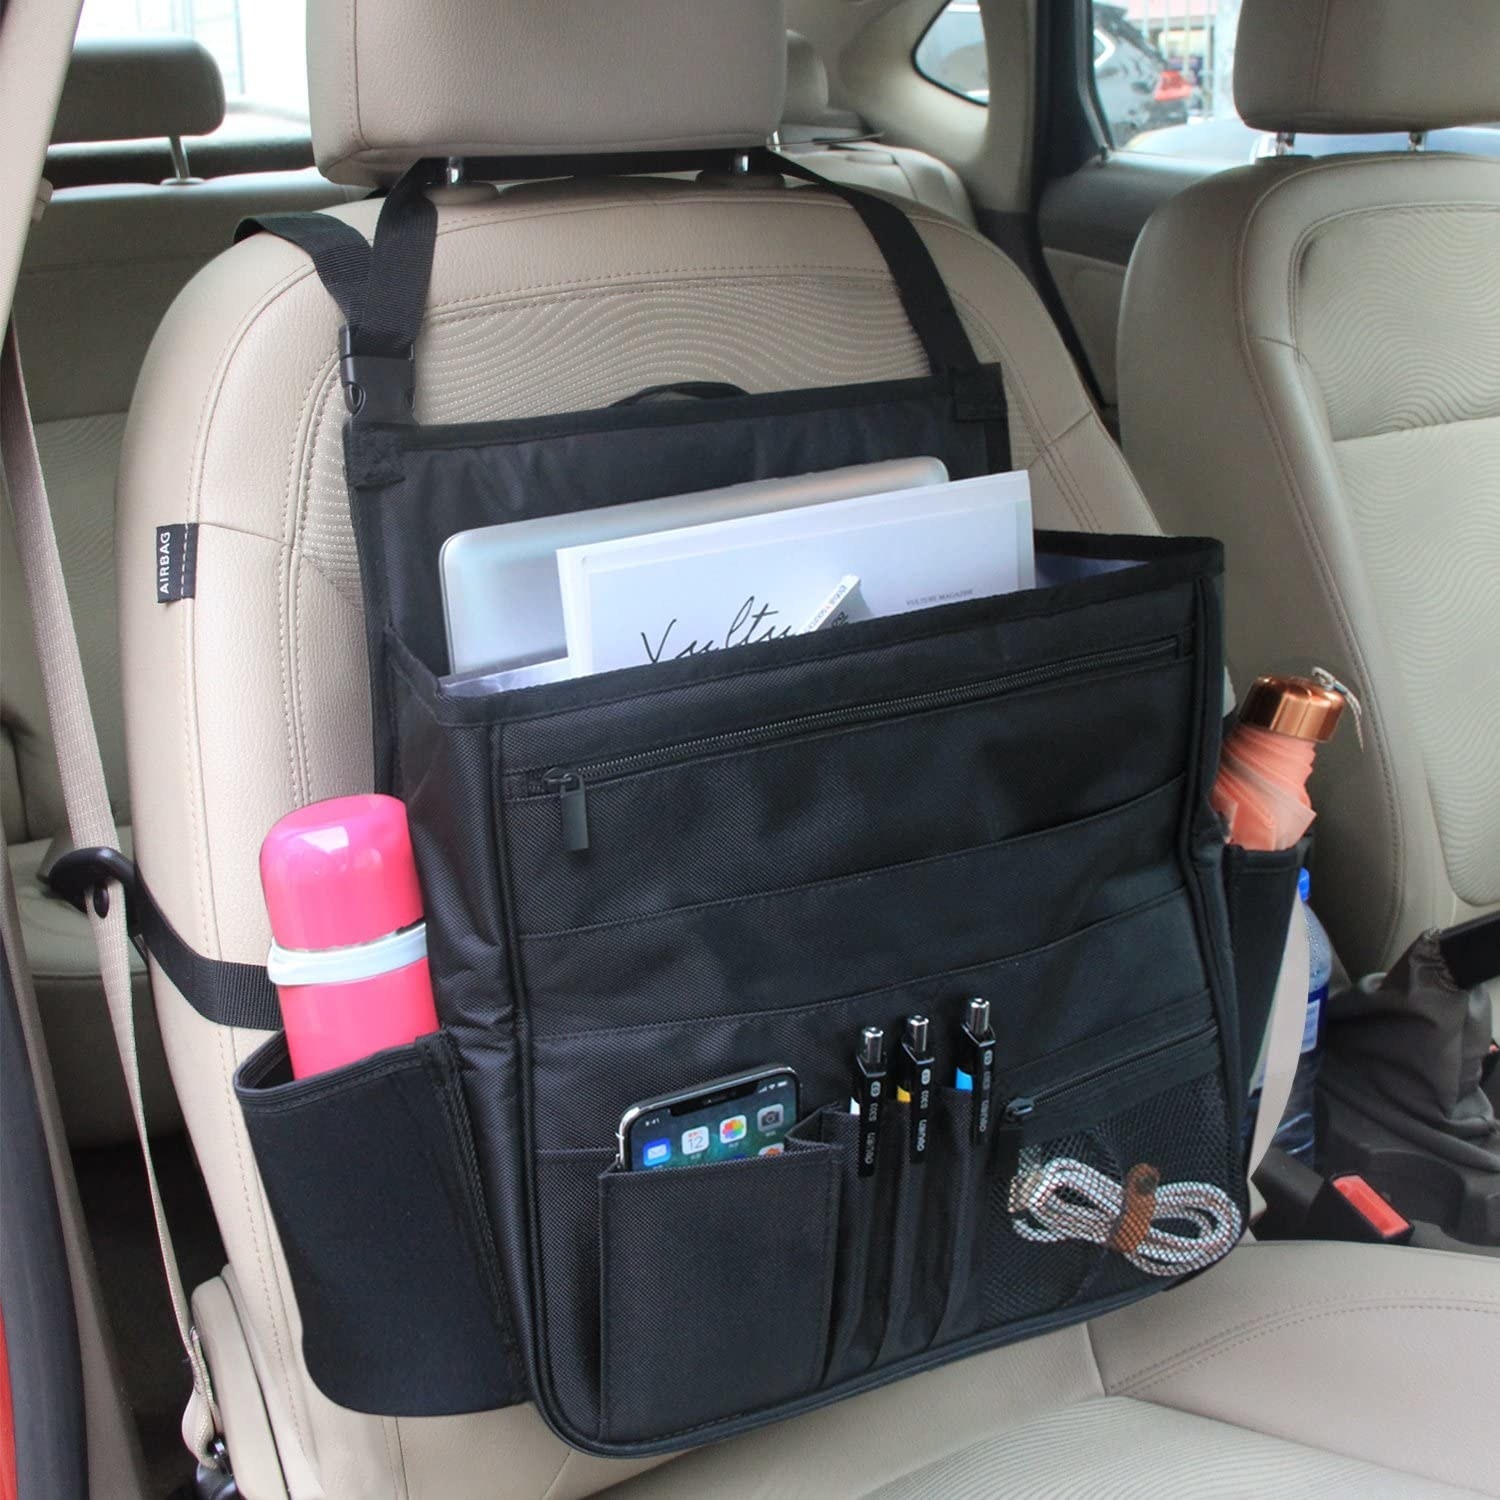 Several items, including pens, a phone, and a computer, in the passenger seat organizer